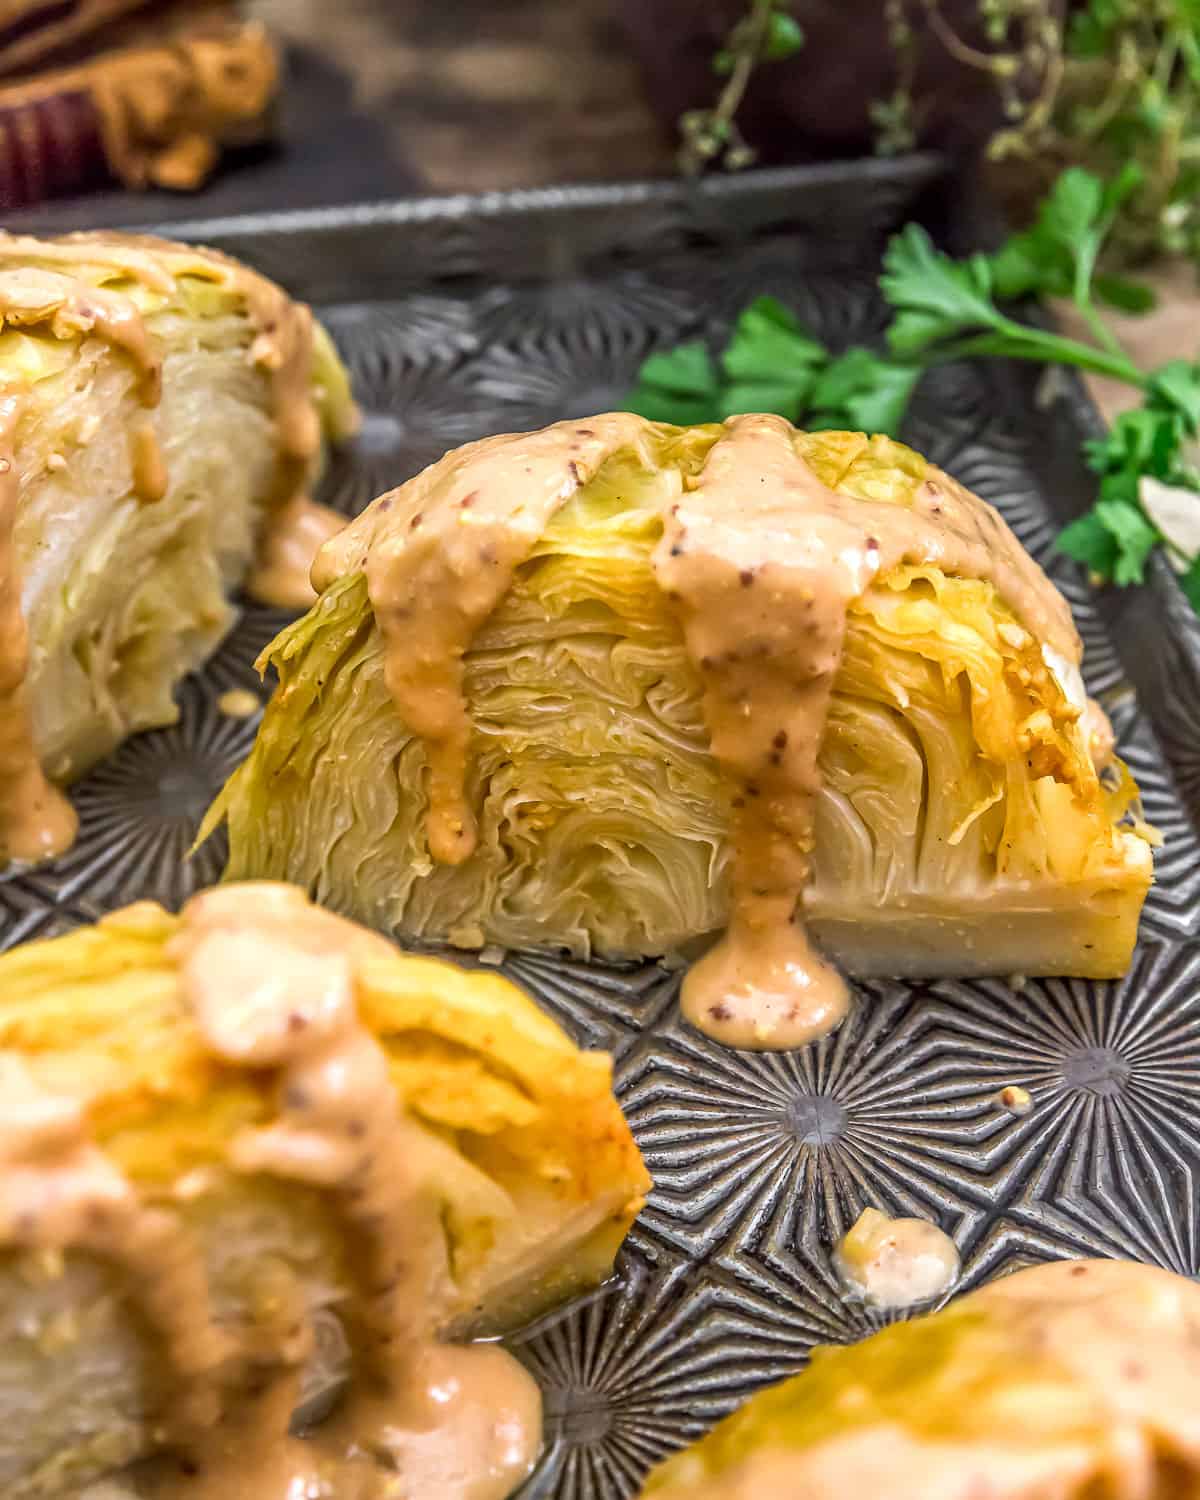 Instant Pot Ruben Cabbage Wedges with Thousand Island Dressing